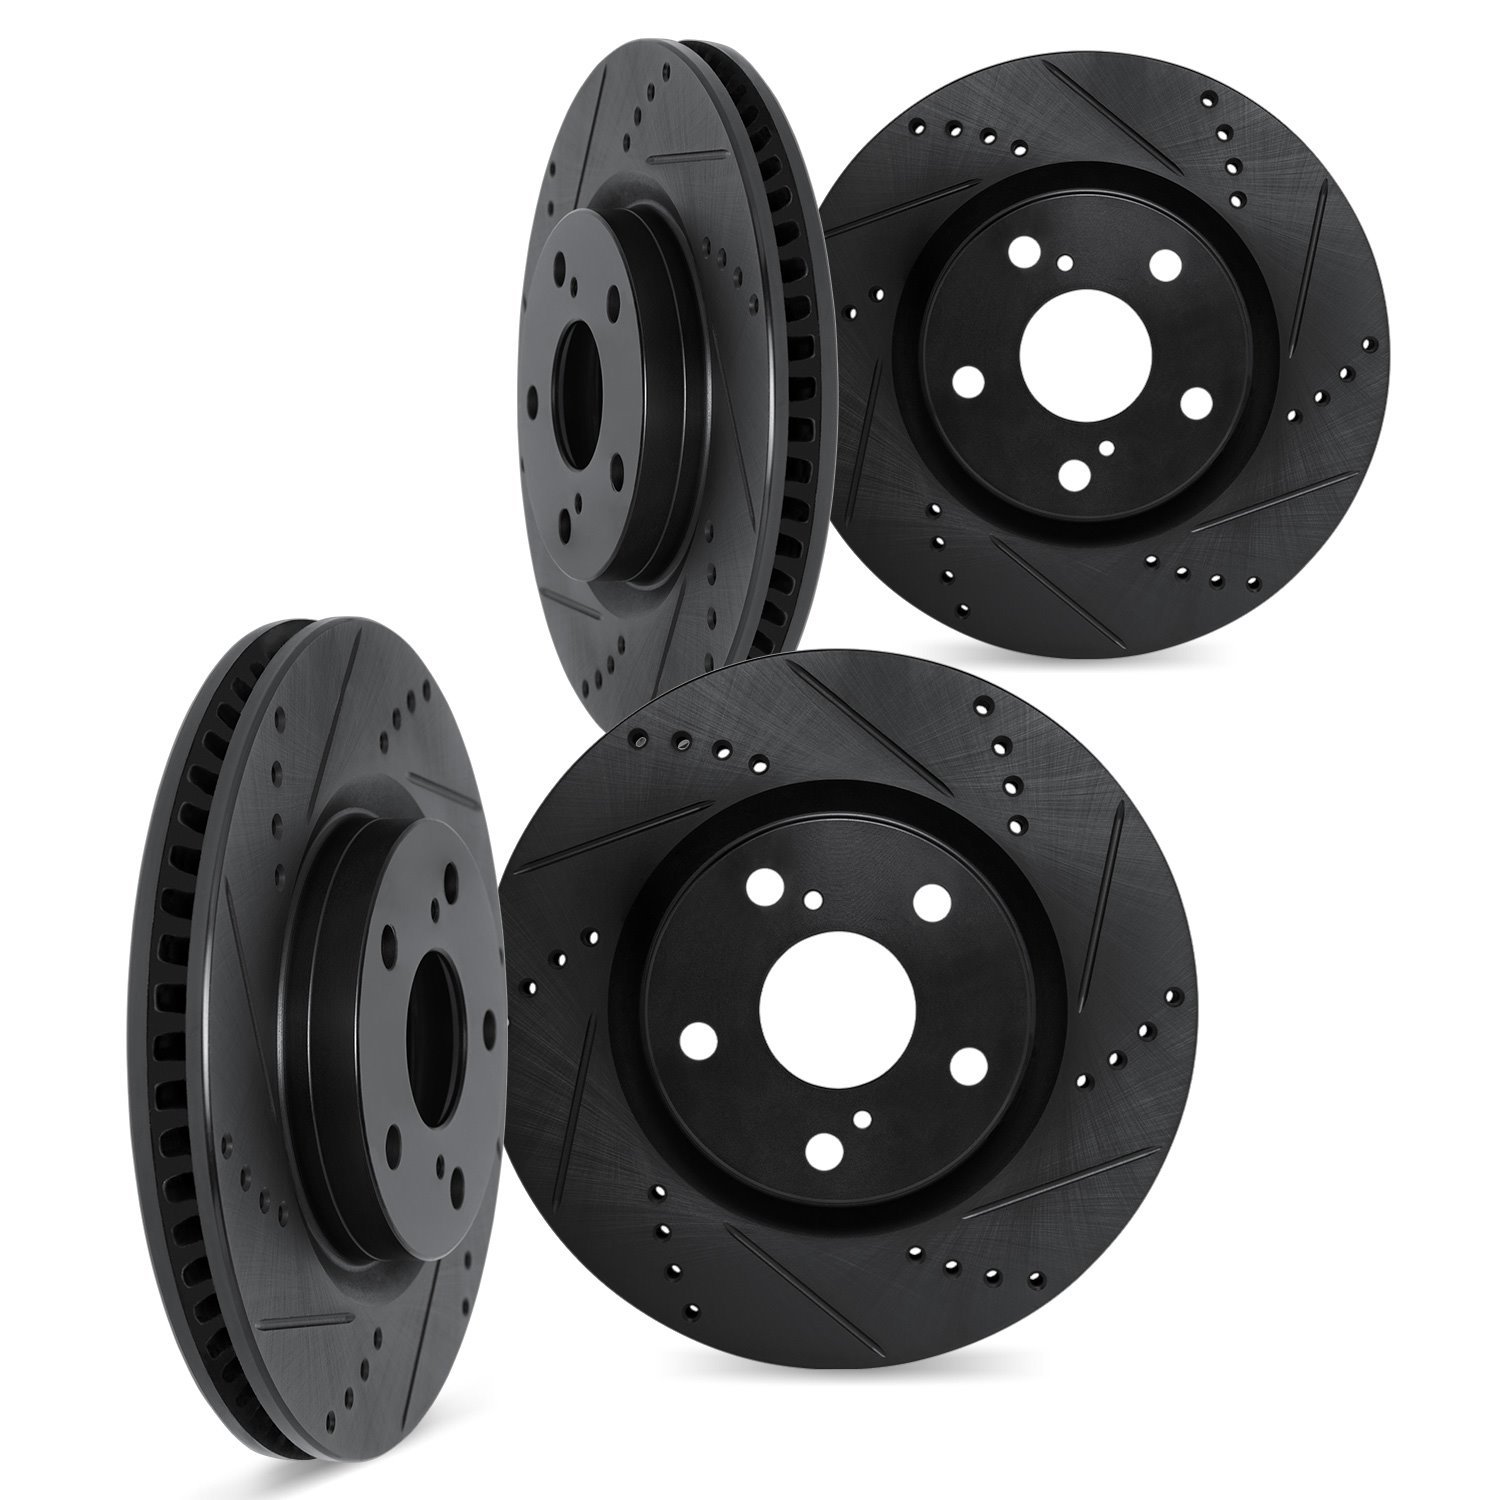 8004-13004 Drilled/Slotted Brake Rotors [Black], 2006-2014 Subaru, Position: Front and Rear